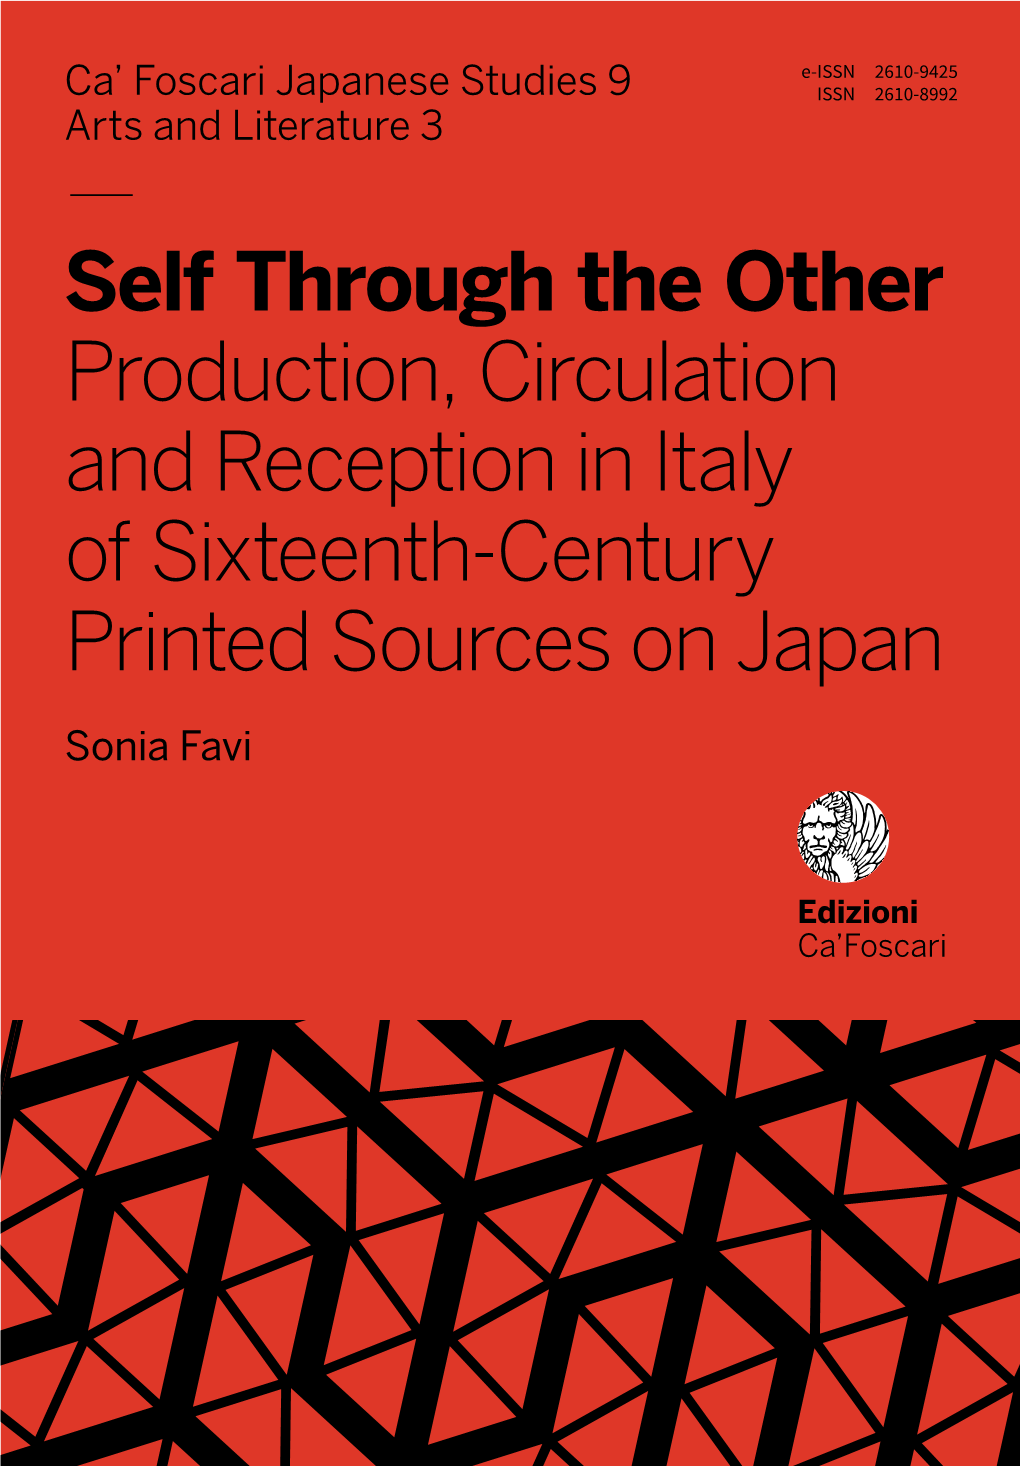 — Self Through the Other Production, Circulation and Reception in Italy Of